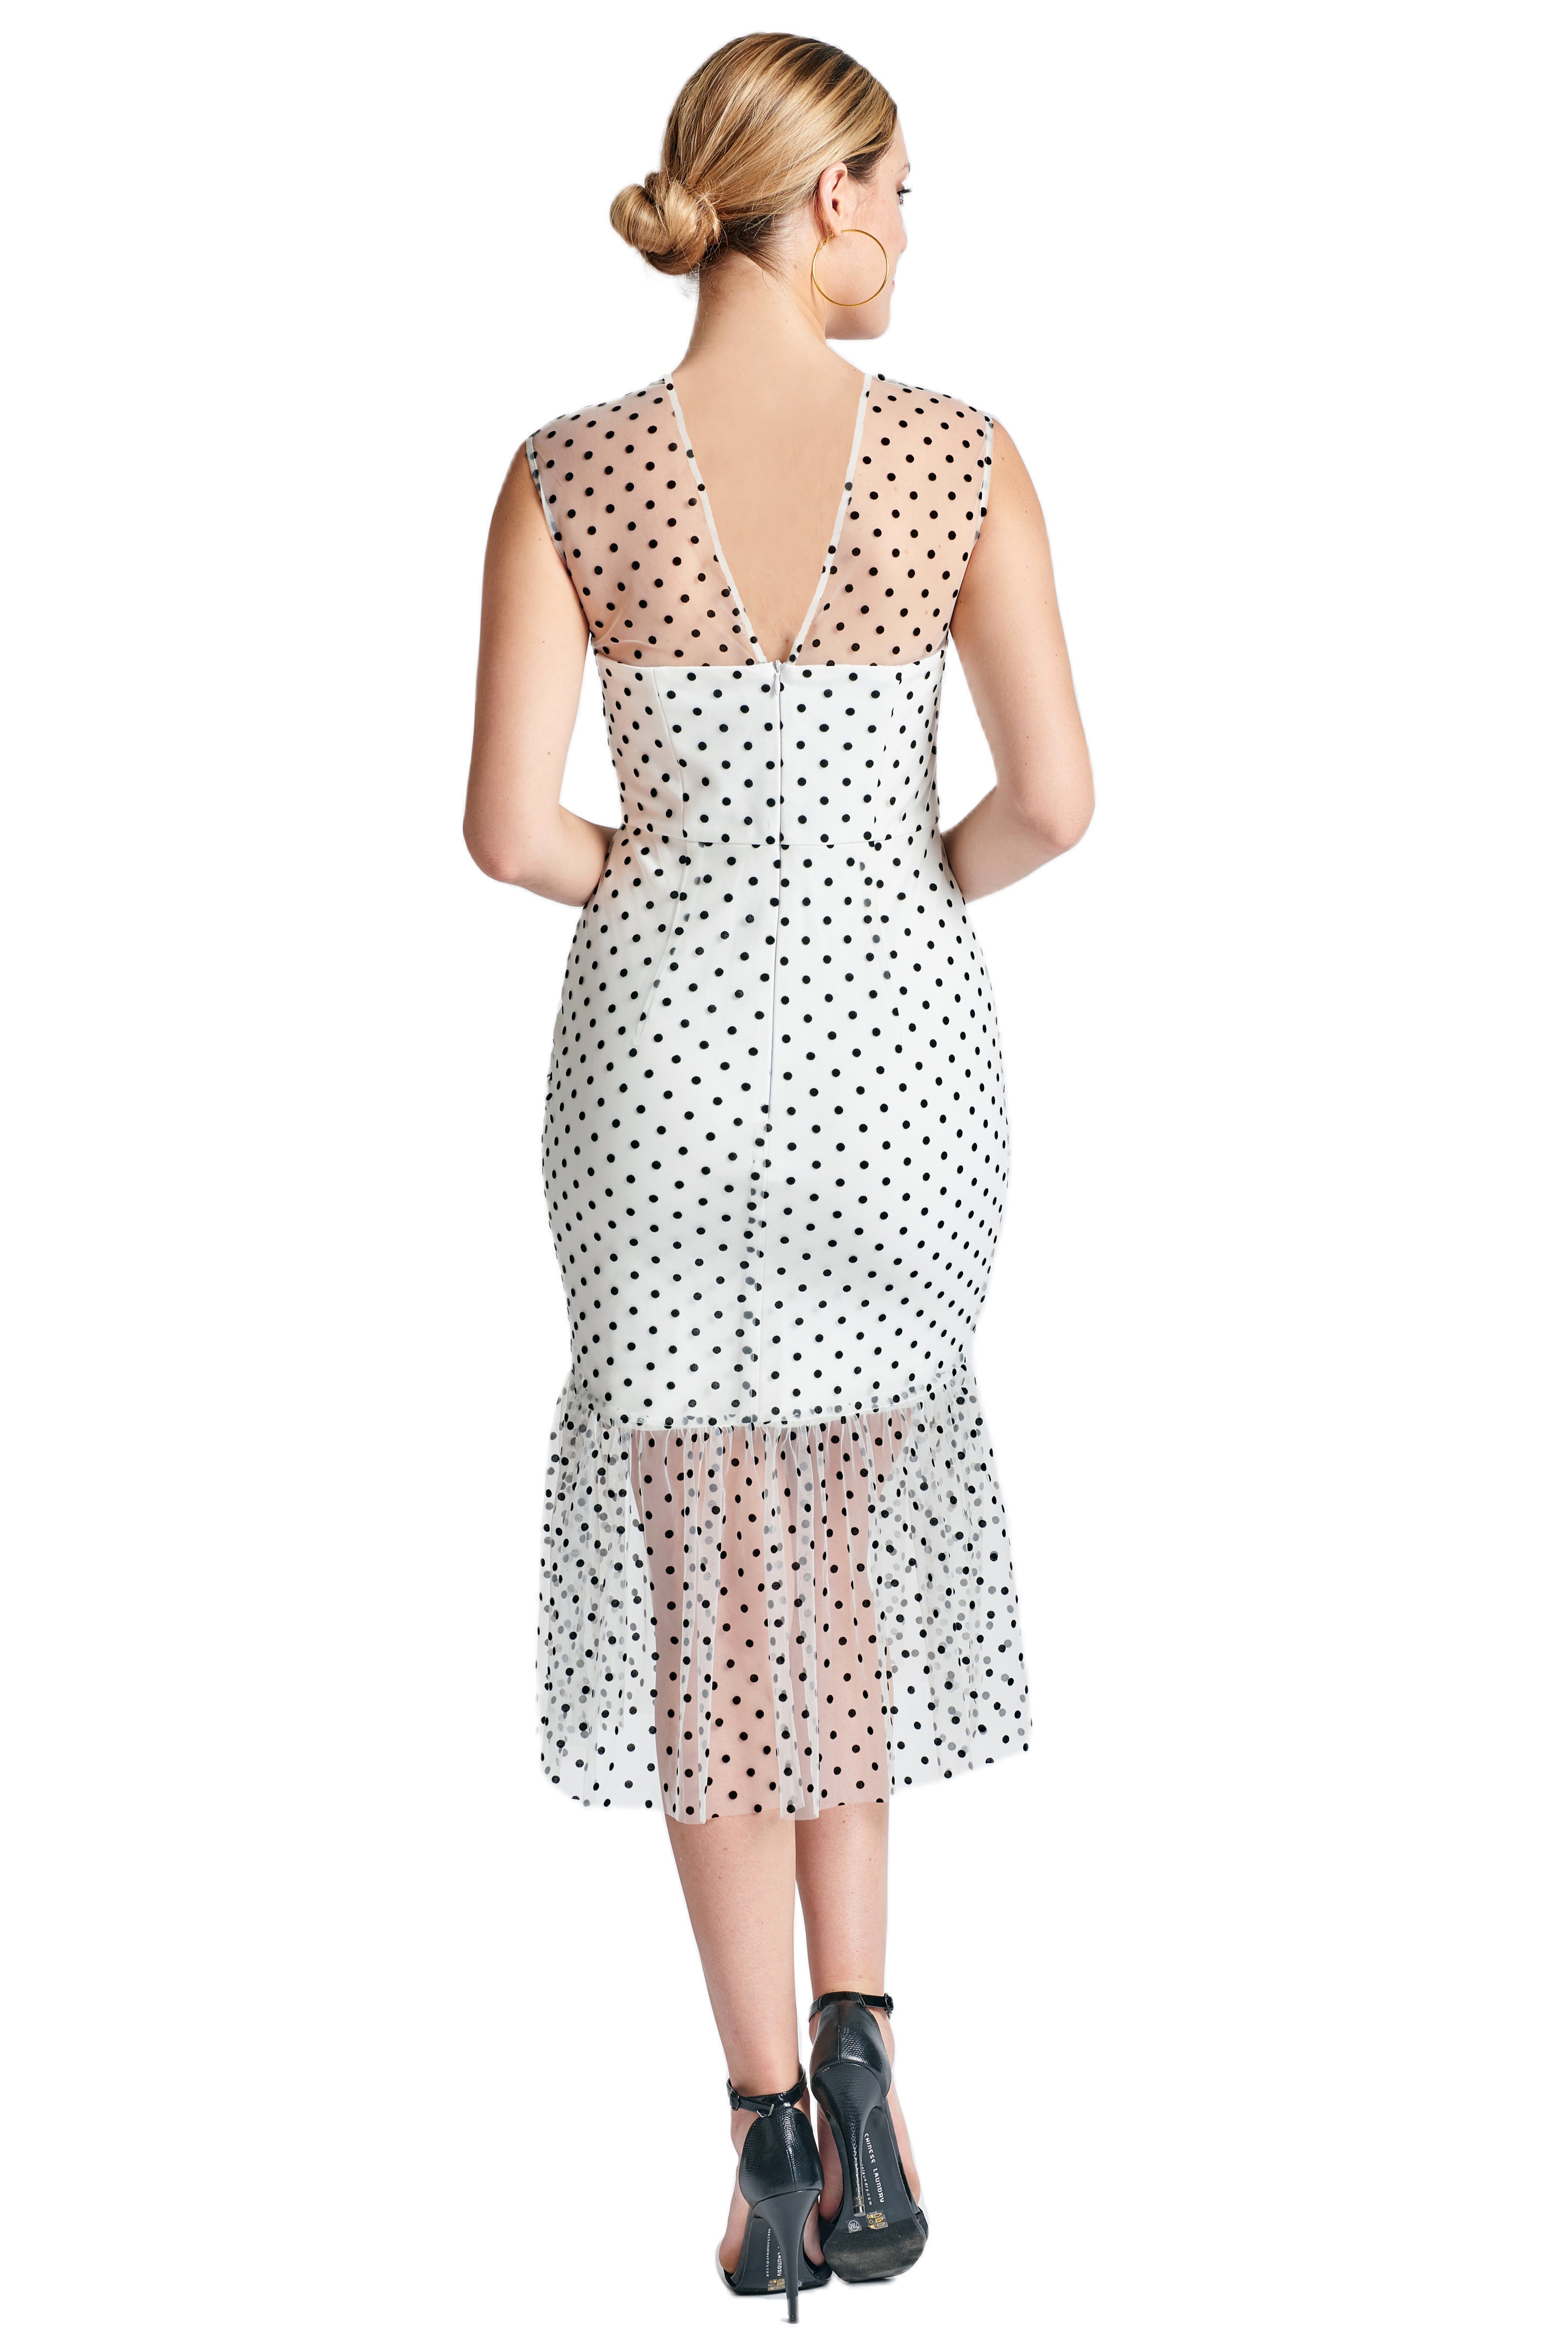 Back view of model wearing the Simona Maghen Muse Dress, white mesh with black polka dots sleeveless midi dress with sheer ruffle hem, and v-neckline.